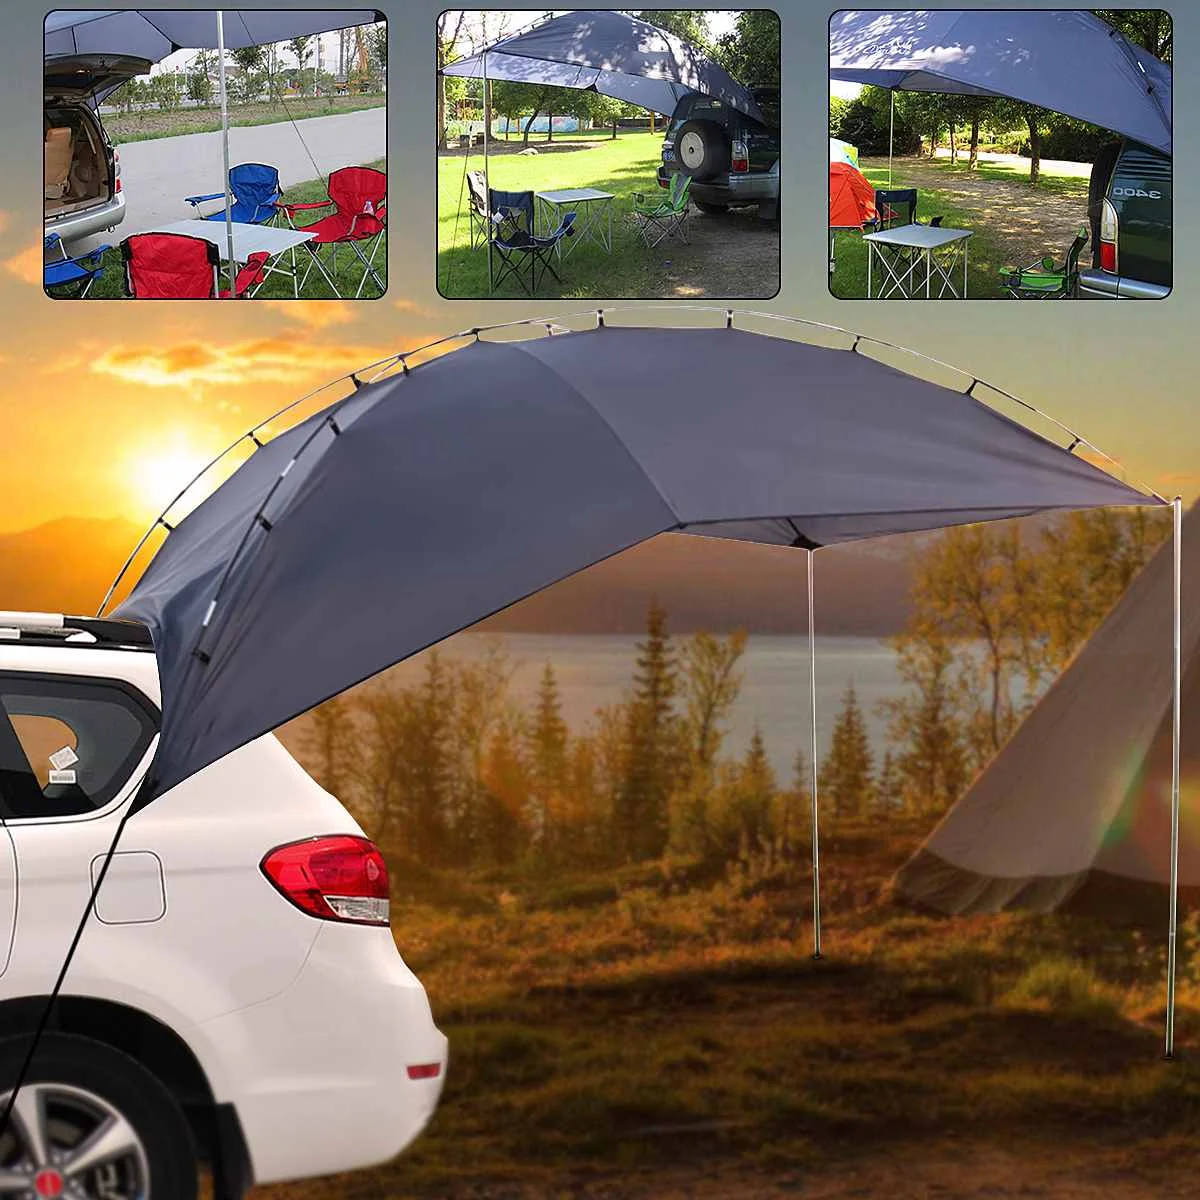 

Portable Shelter Truck Car Tent Trailer Awning Rooftop Campers Outdoor Canopy Sunshade